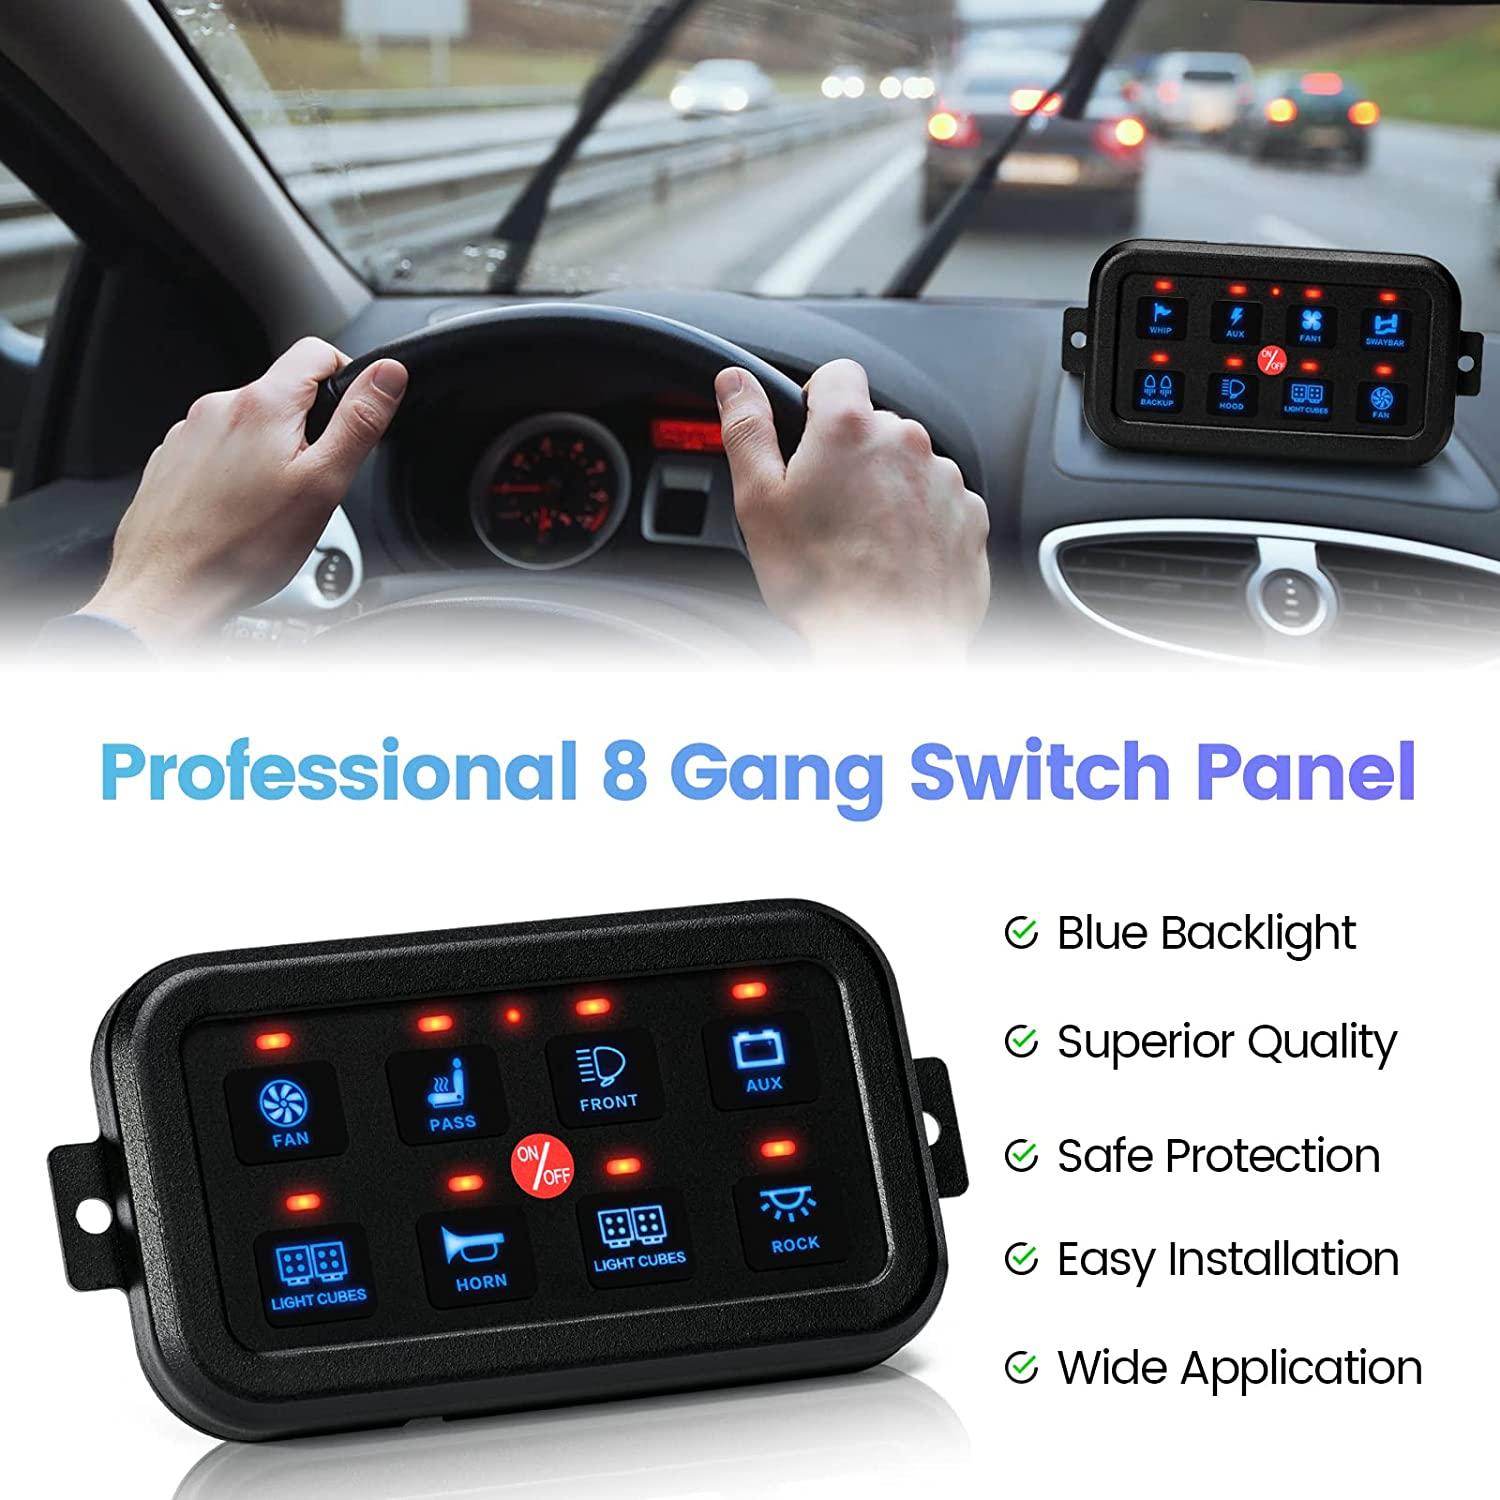 8 Gang Switch Panel, Briidea Switch Panel for Car with All Metal Housing, Multifunction 12V-24V, Ideal for Car, Golf Cart, ATV, UTV, RV, Truck, Enhance Your Driving Experience - briidea